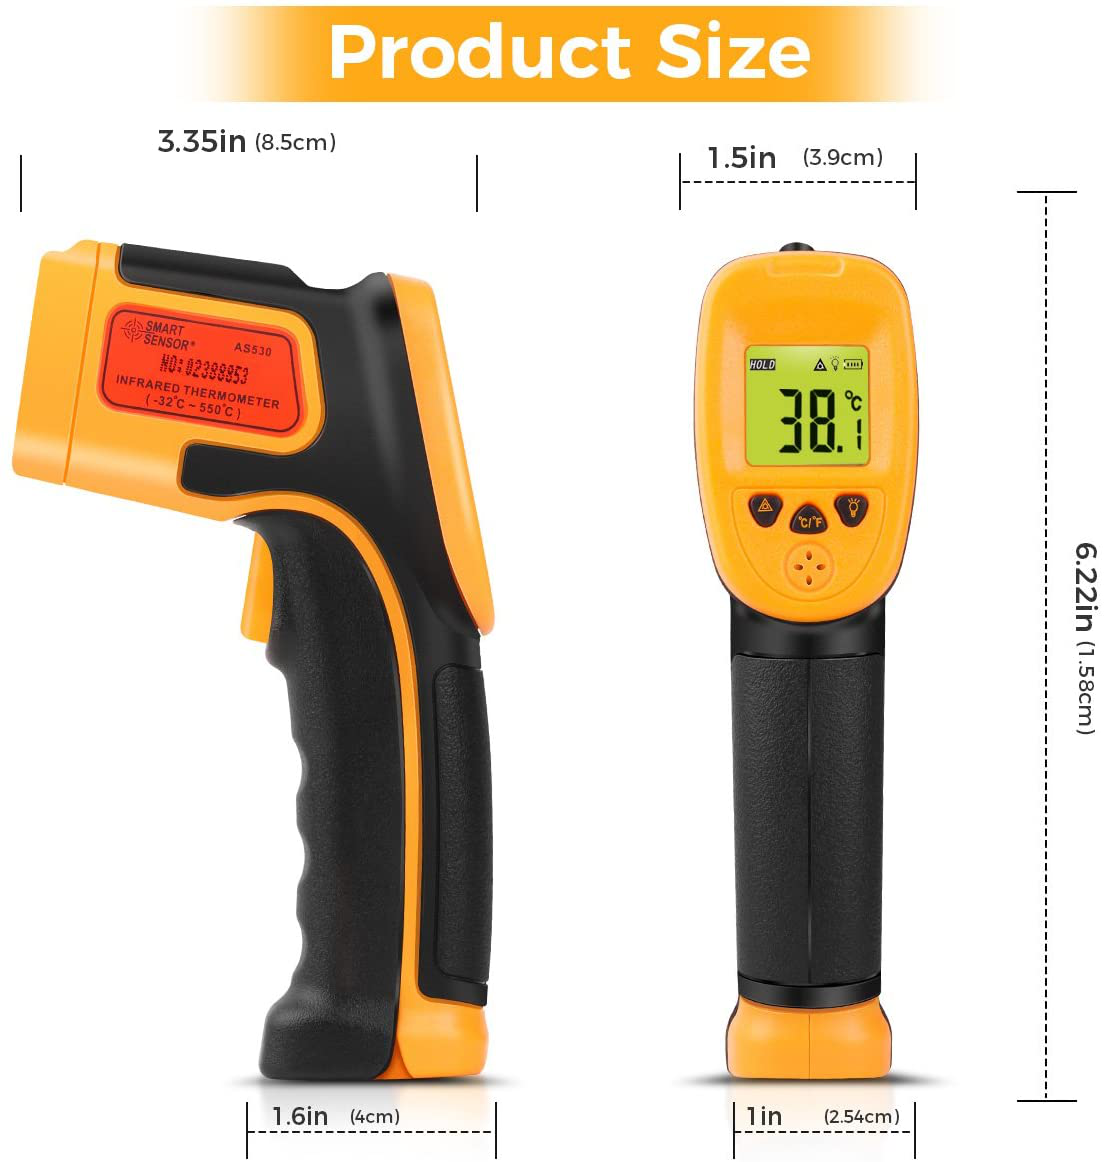 Infrared Thermometer, Digital IR Laser Thermometer Temperature Gun -26°F~1022°F (-32°C～550°C) Temperature Probe Cooking/Air/Refrigerator - Meat Thermometer Included -Non Body Thermometer